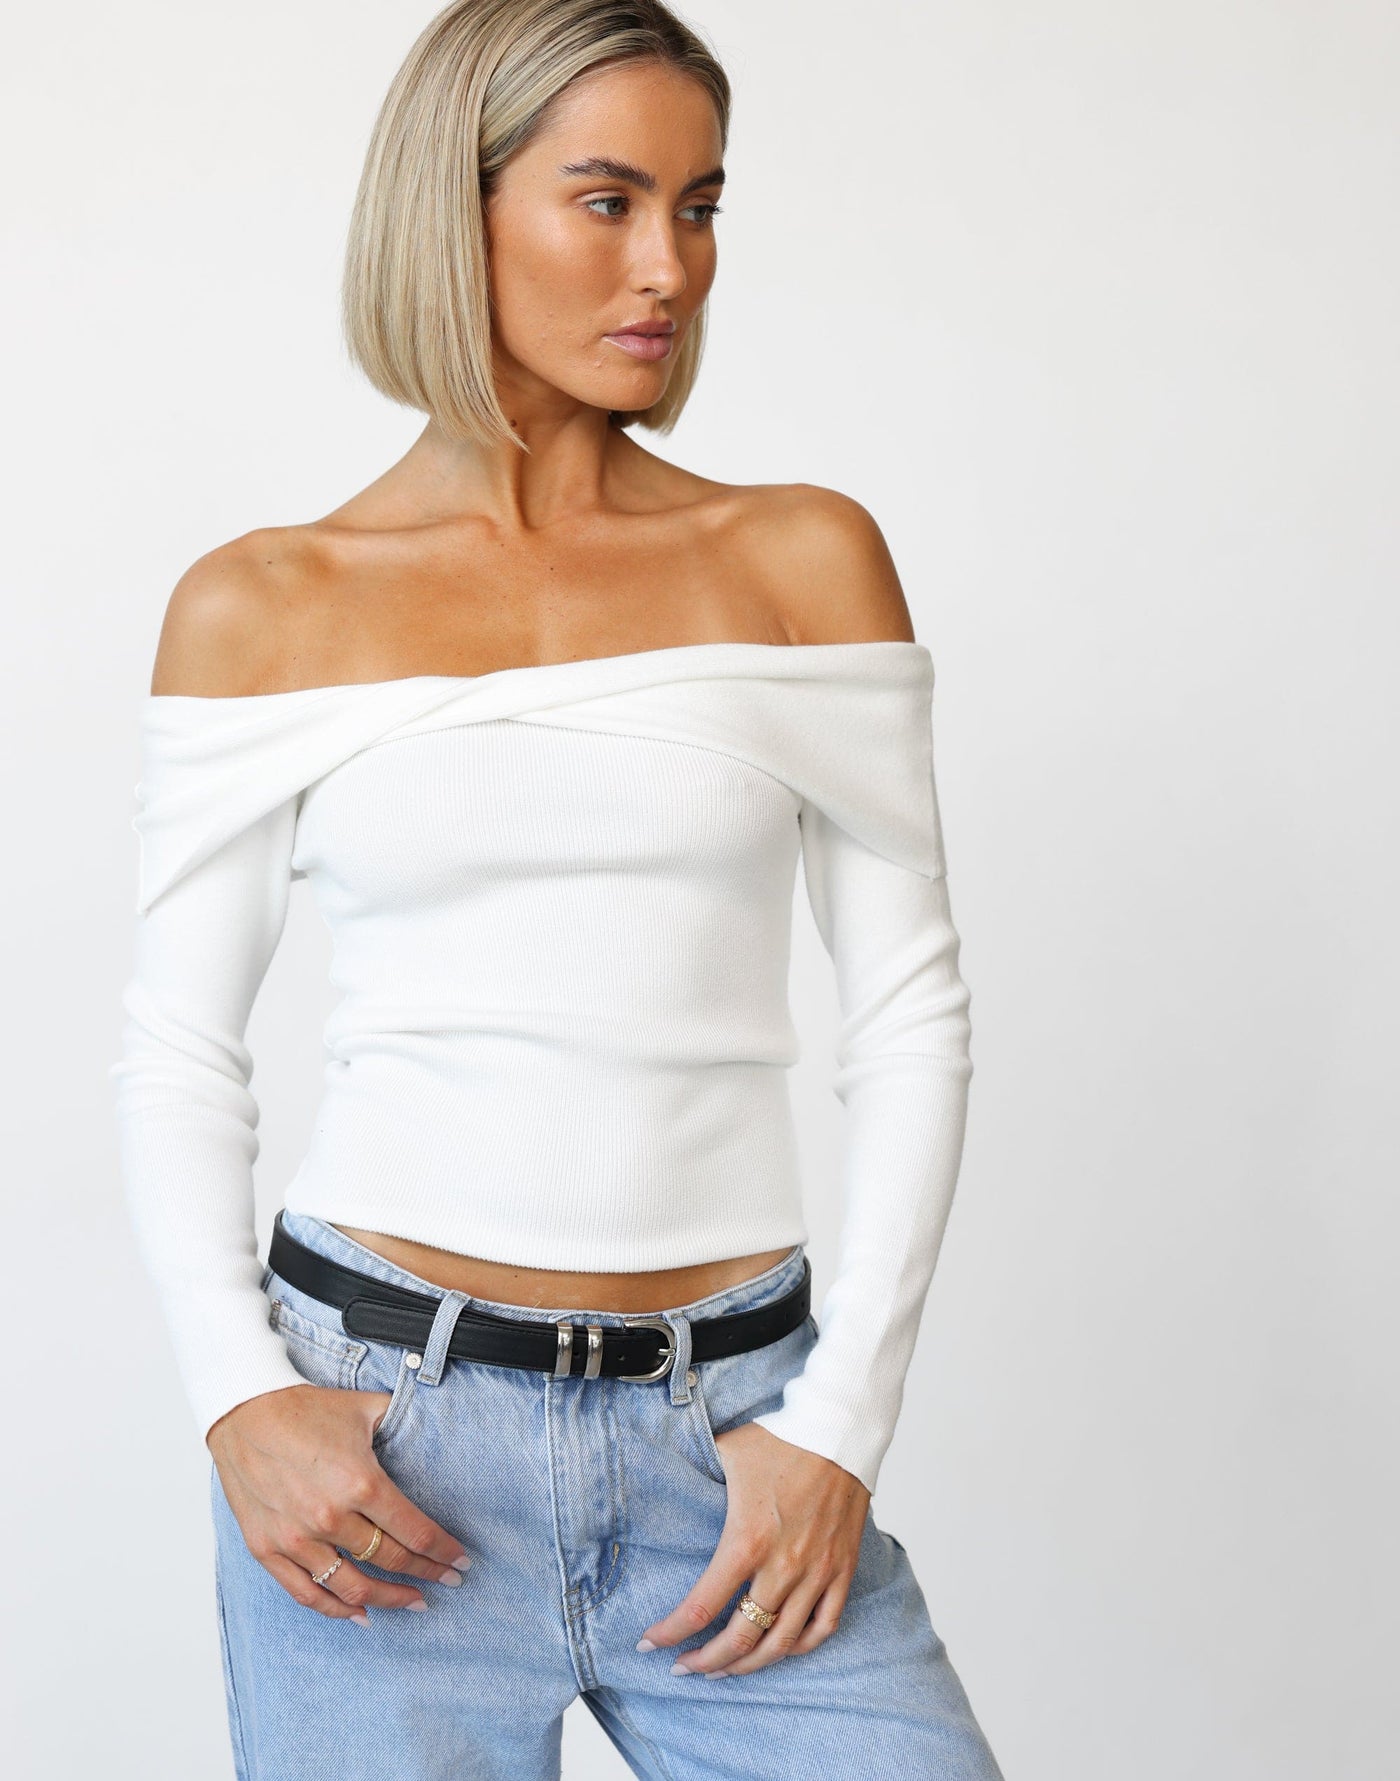 Elena Top (White) - Crossed Front High Neck Ribbed Knit Long Sleeve - Women's Top - Charcoal Clothing